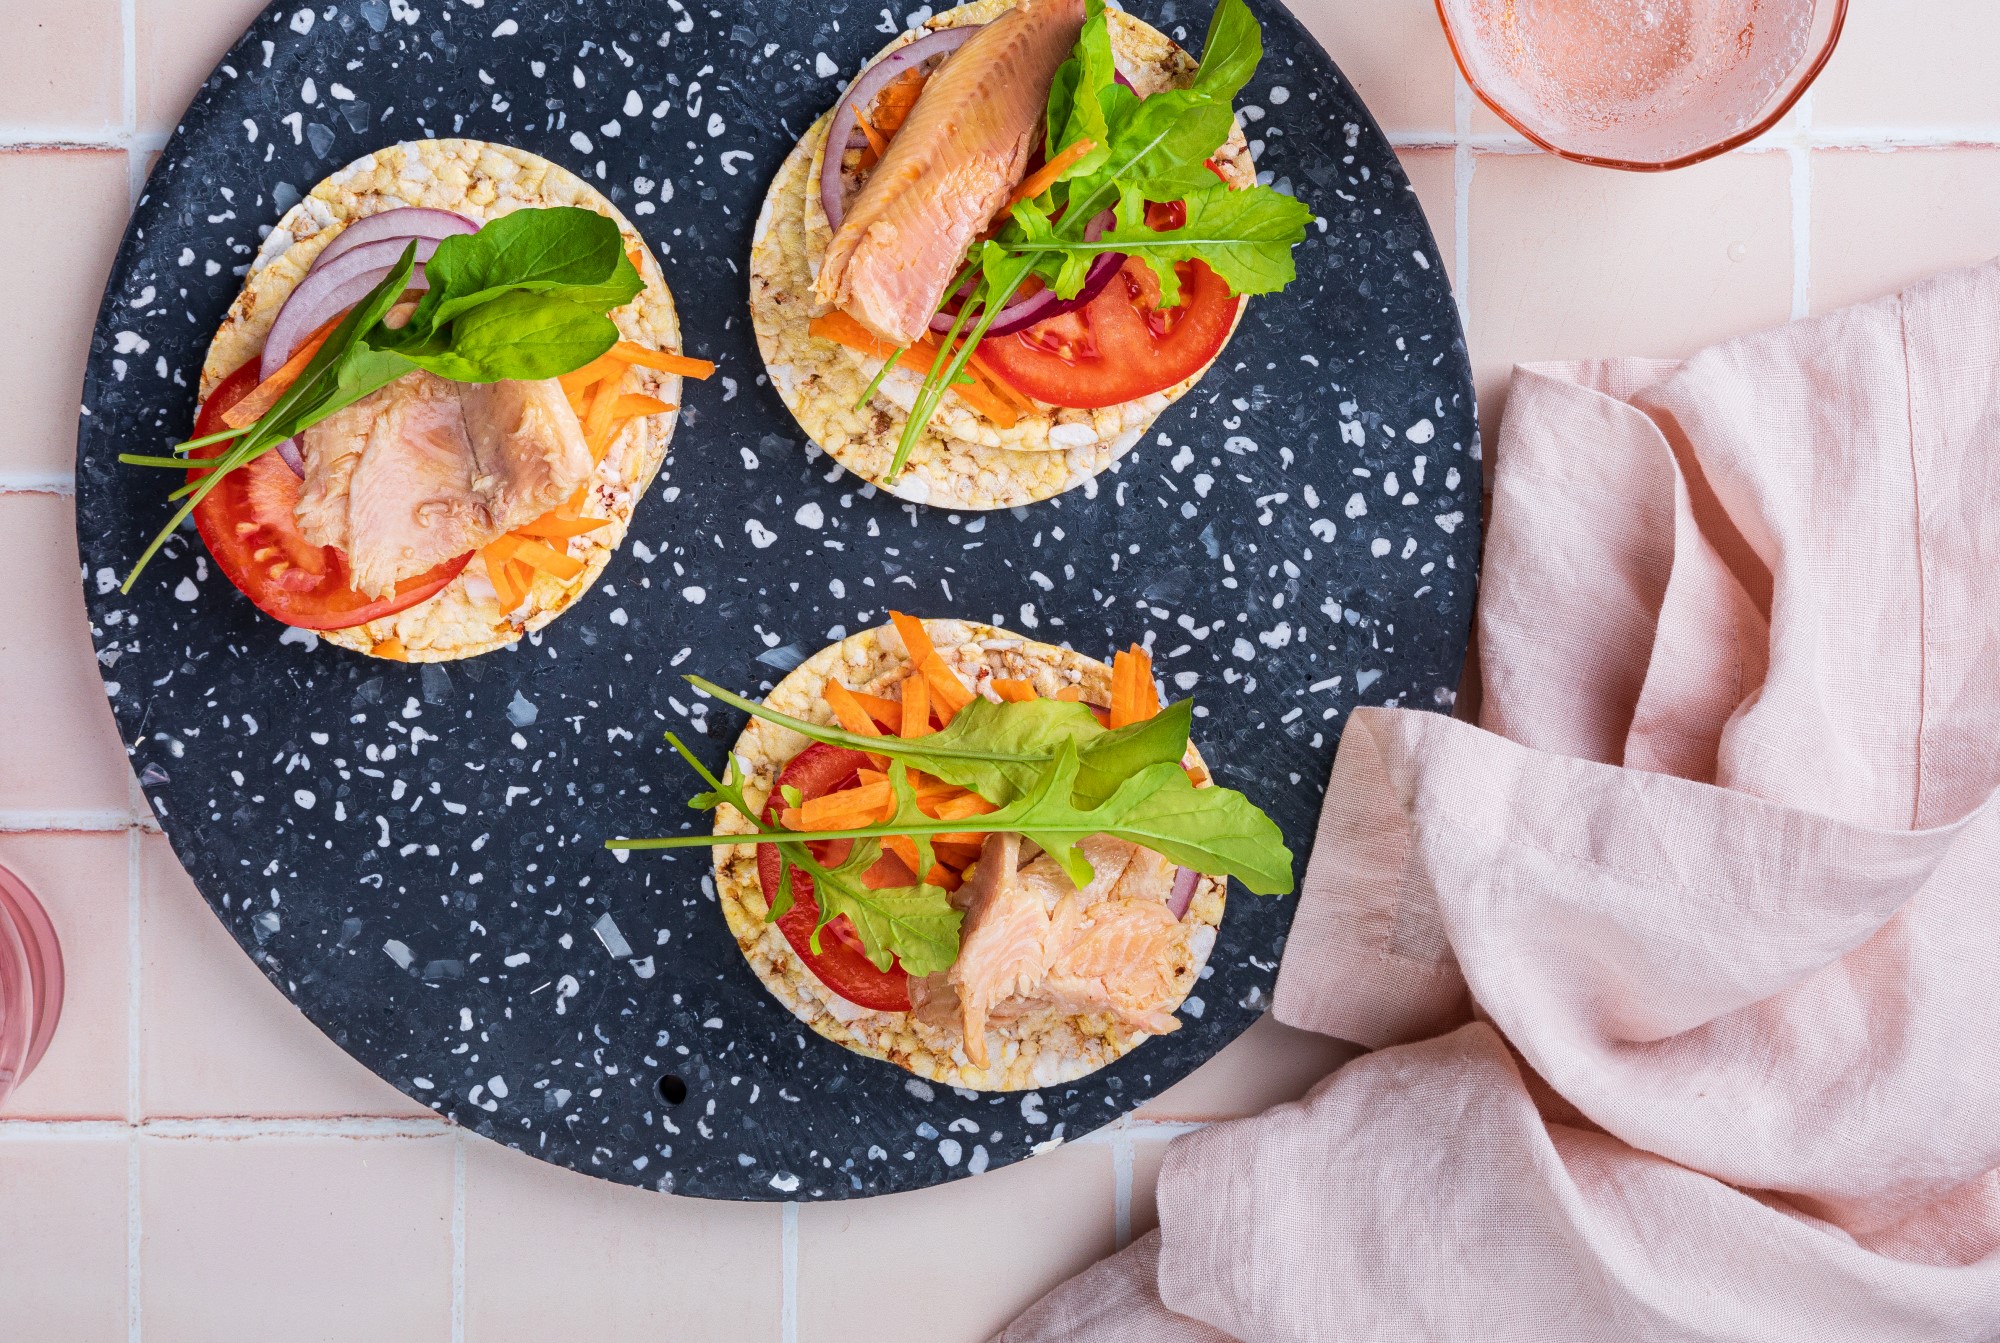 Tomato, Red Onion, Carrot, Rocket, Trout Fillets on Corn Thins slices